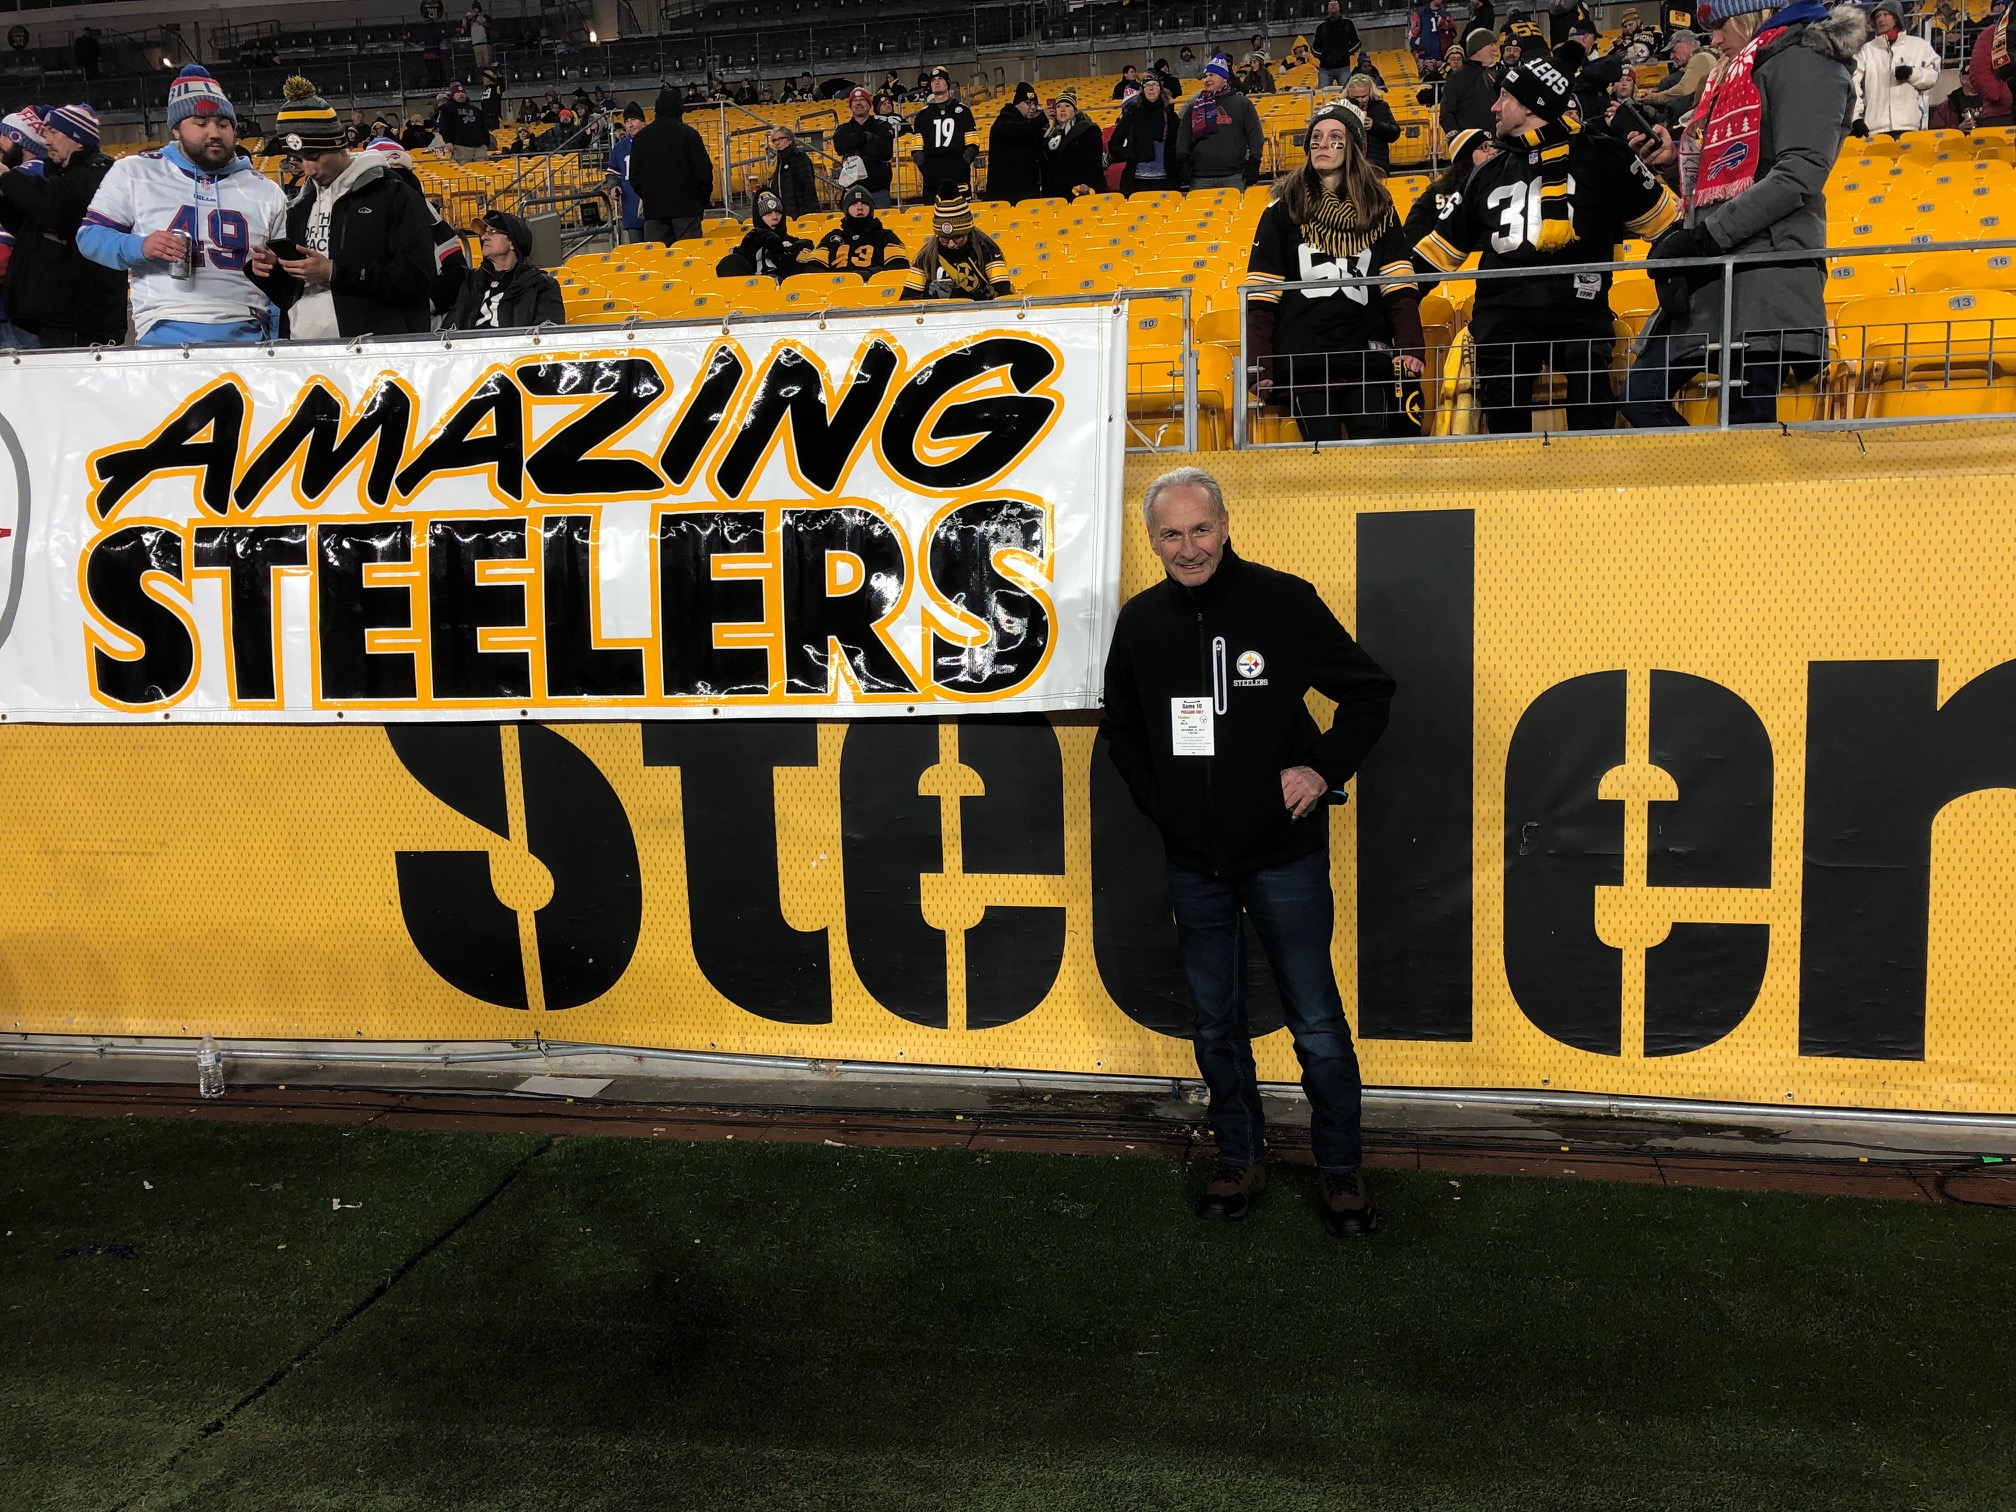 A Wish to go to my first Pittsburgh Steelers game Image